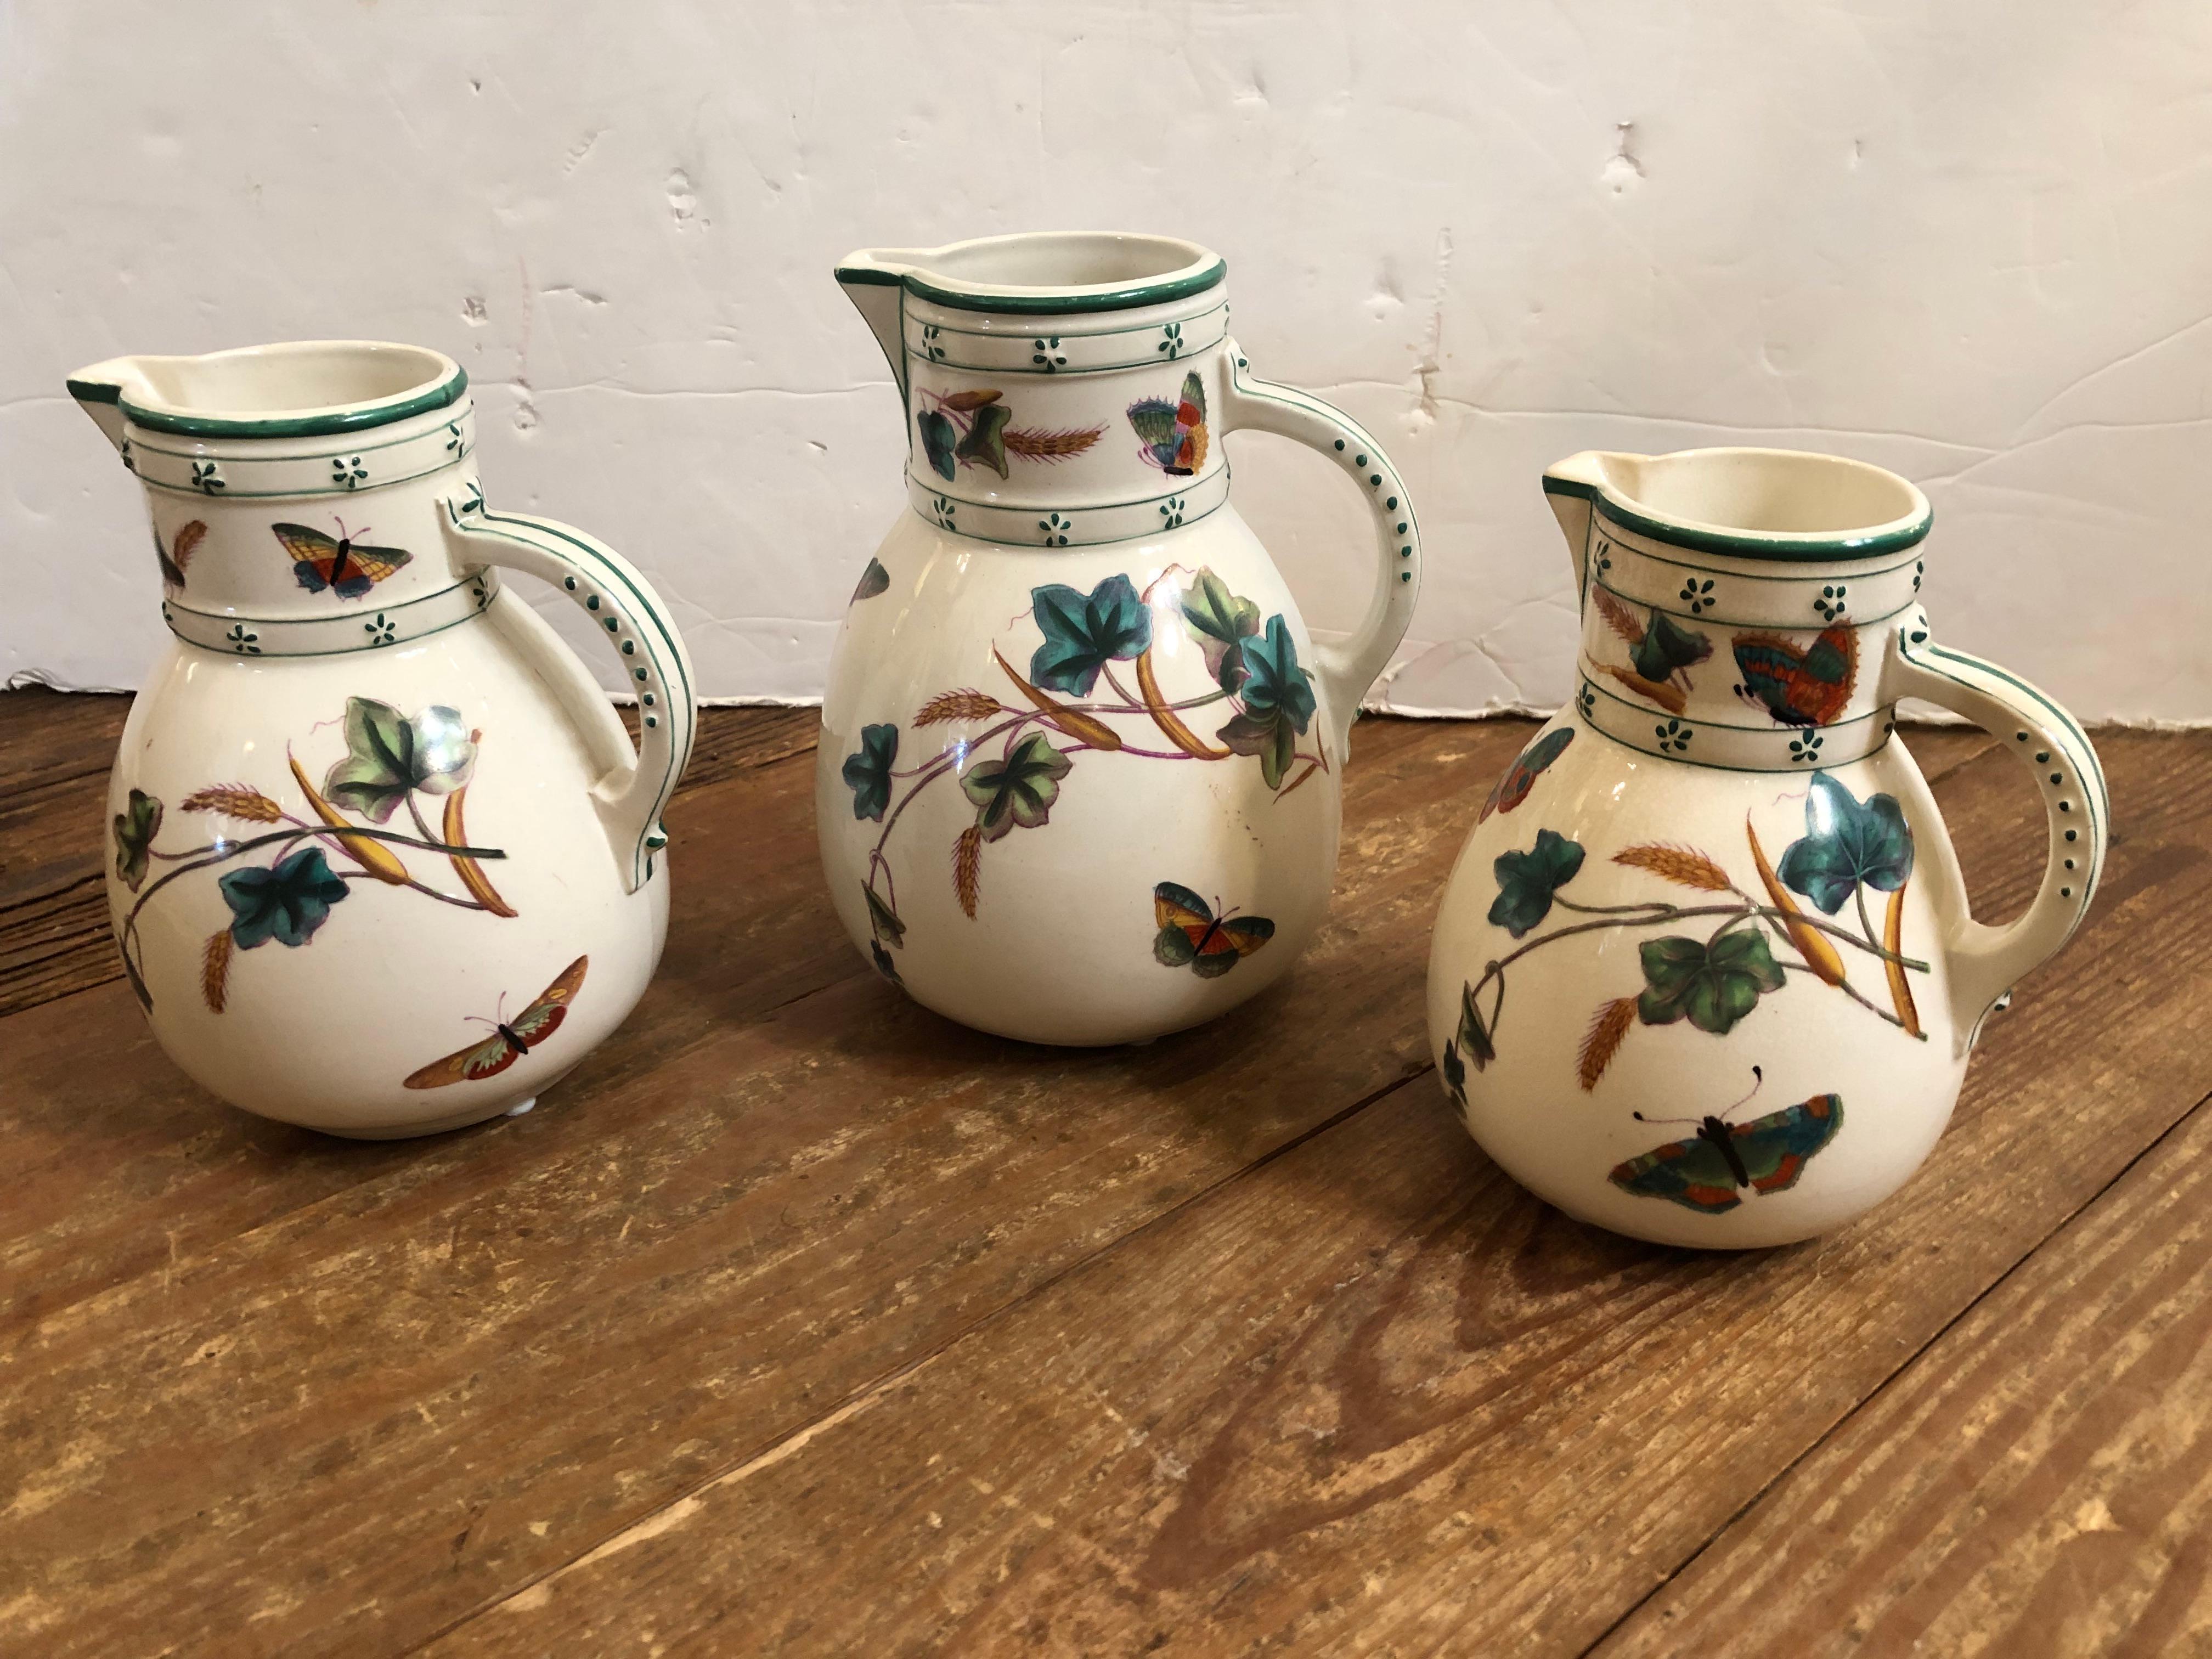 Lovely collection of 3 antique English porcelain pitchers in varying sizes having gorgeous butterflies and flowers handpainted against a white background.
7.5